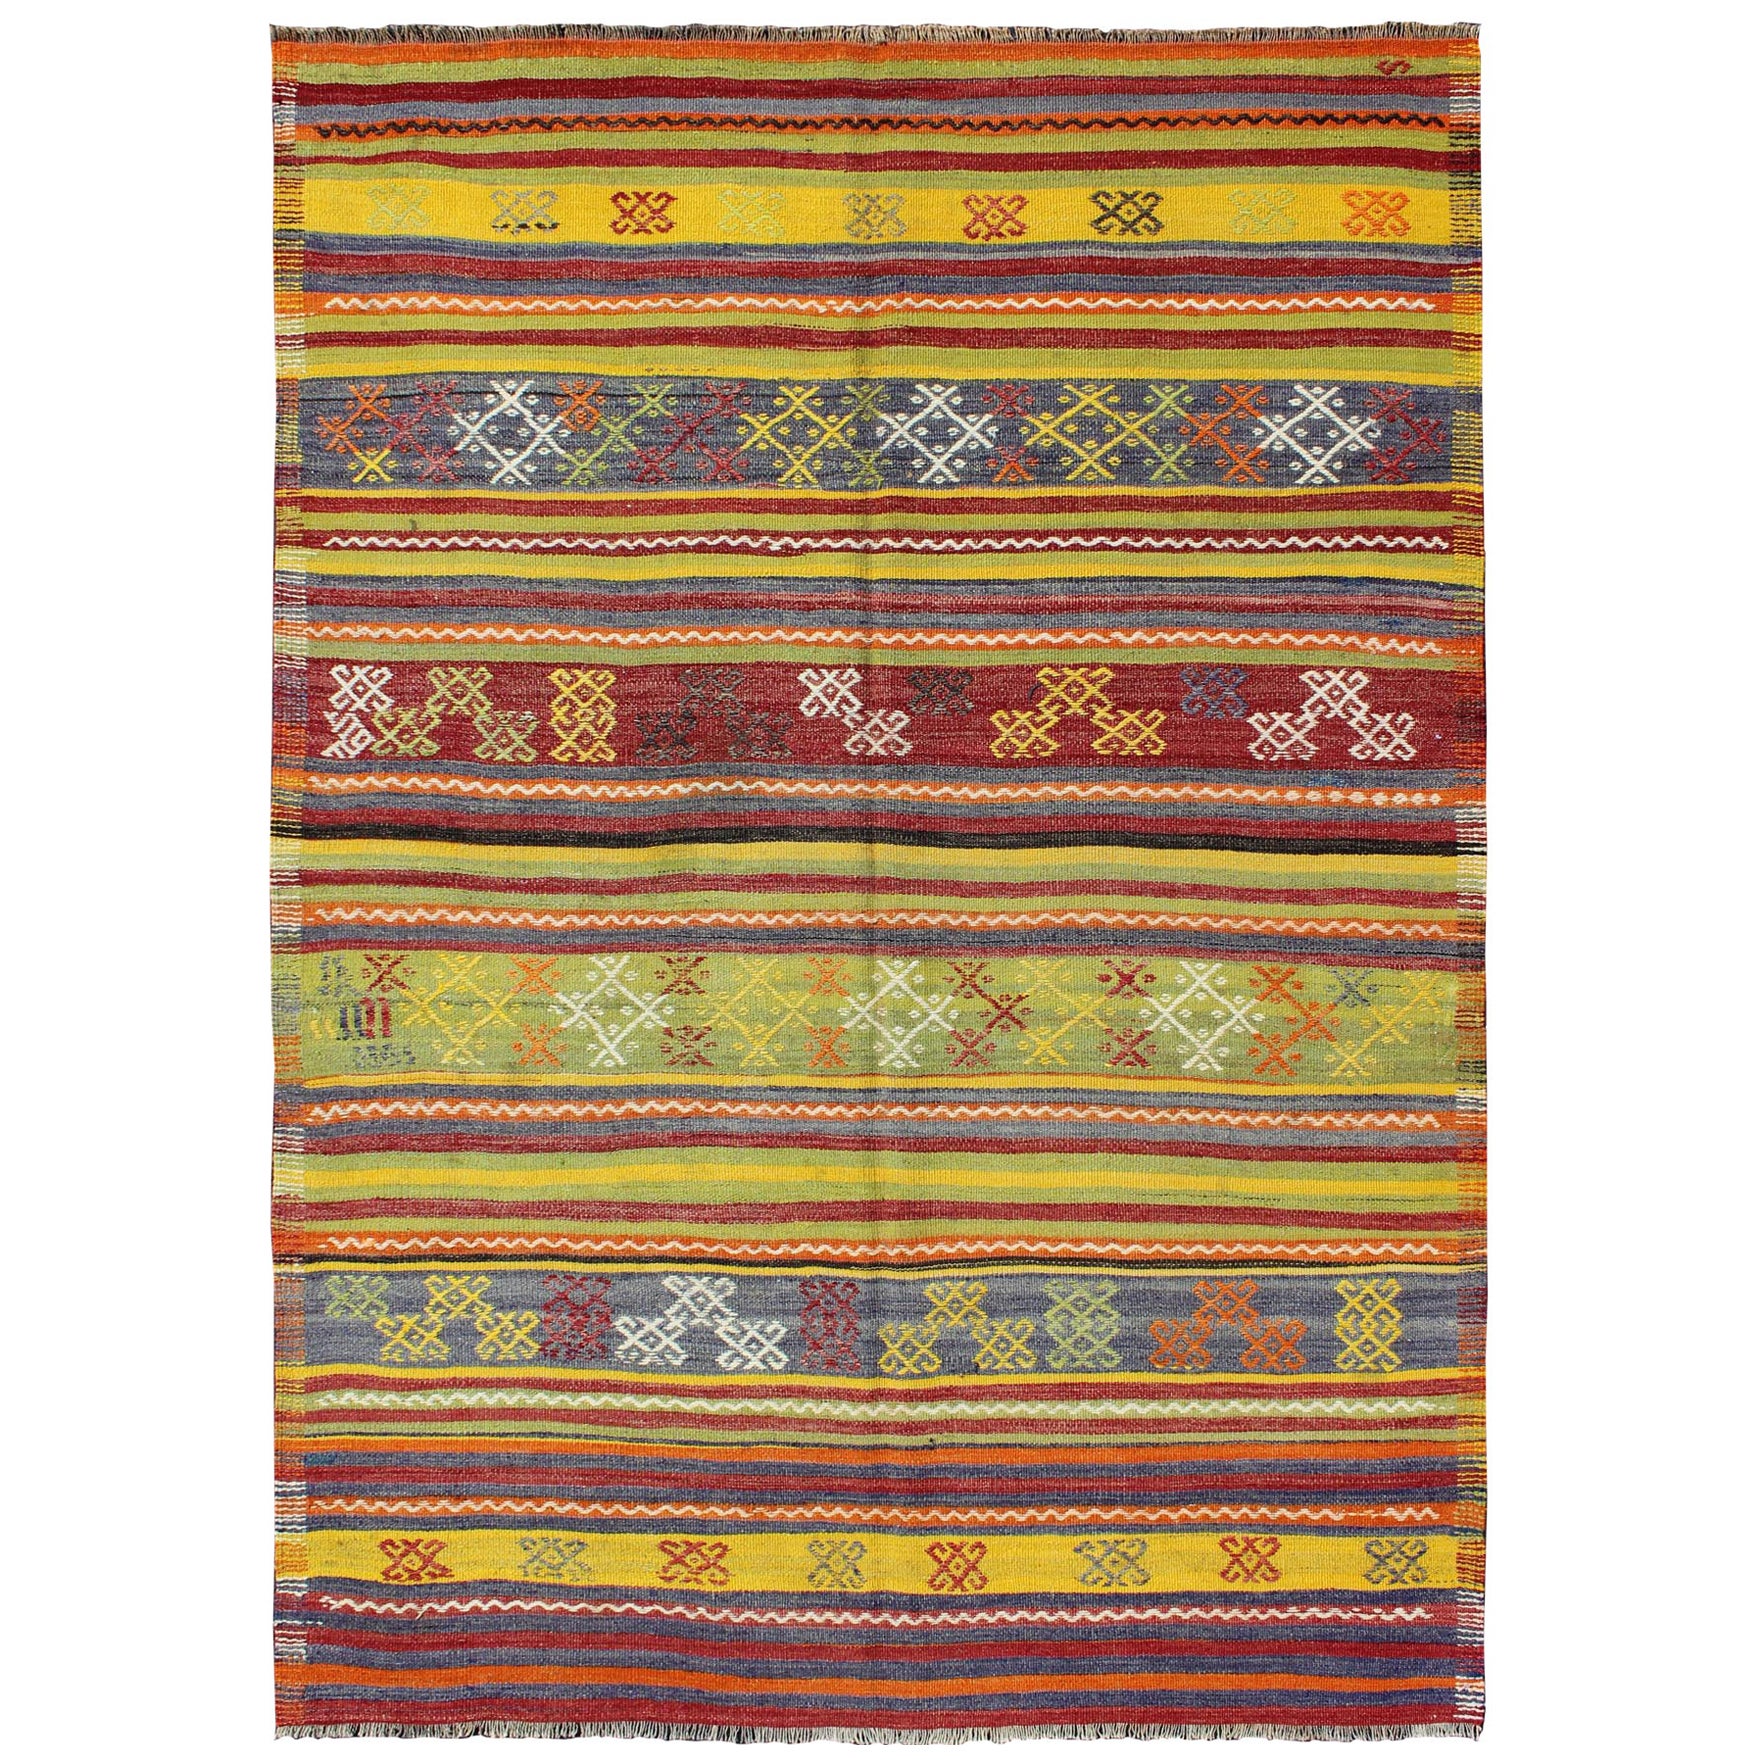 Vintage Turkish Kilim Rug with Geometric Shapes and Colorful Horizontal Stripes For Sale